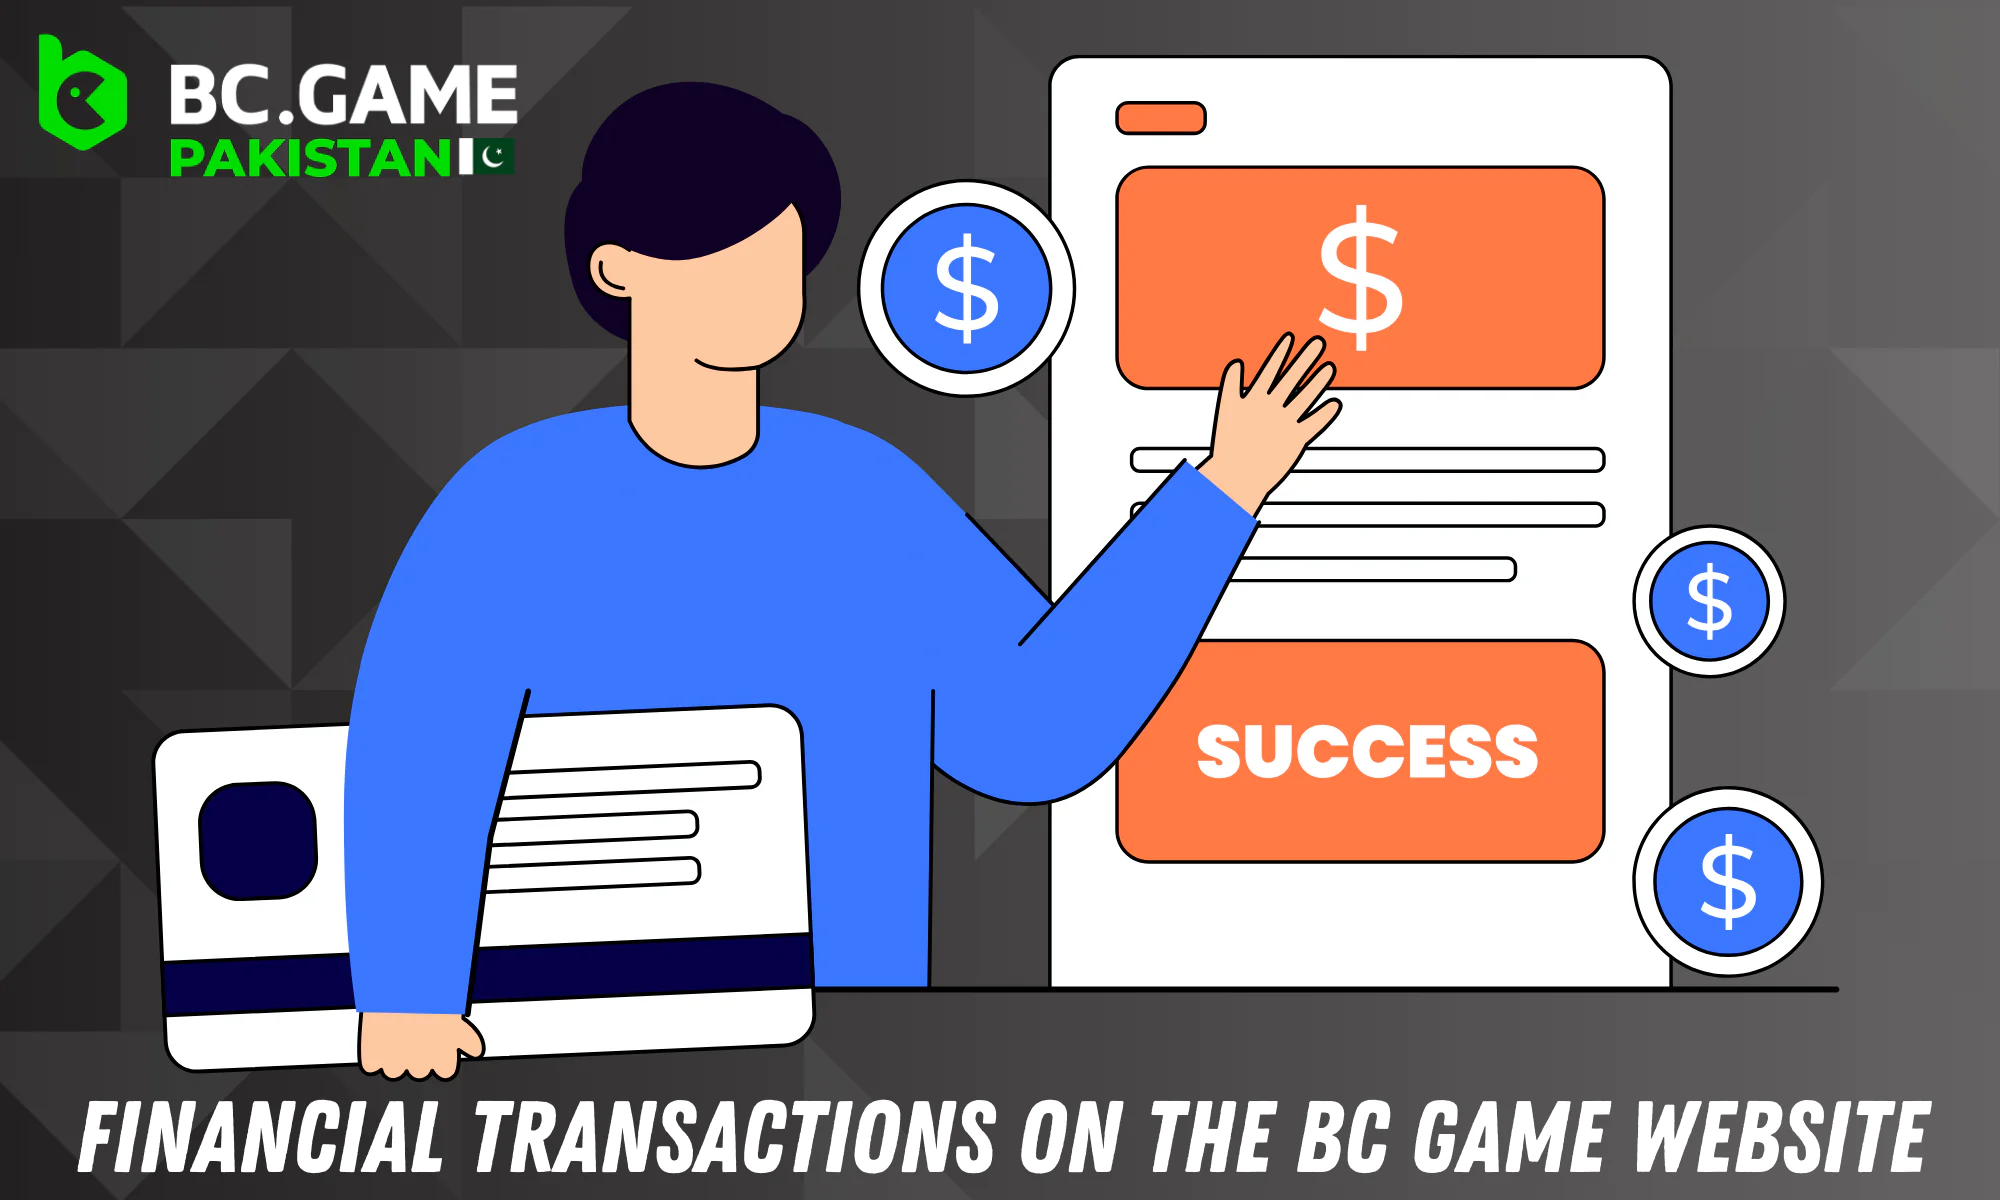 BC online casino guarantees fast and secure financial transactions